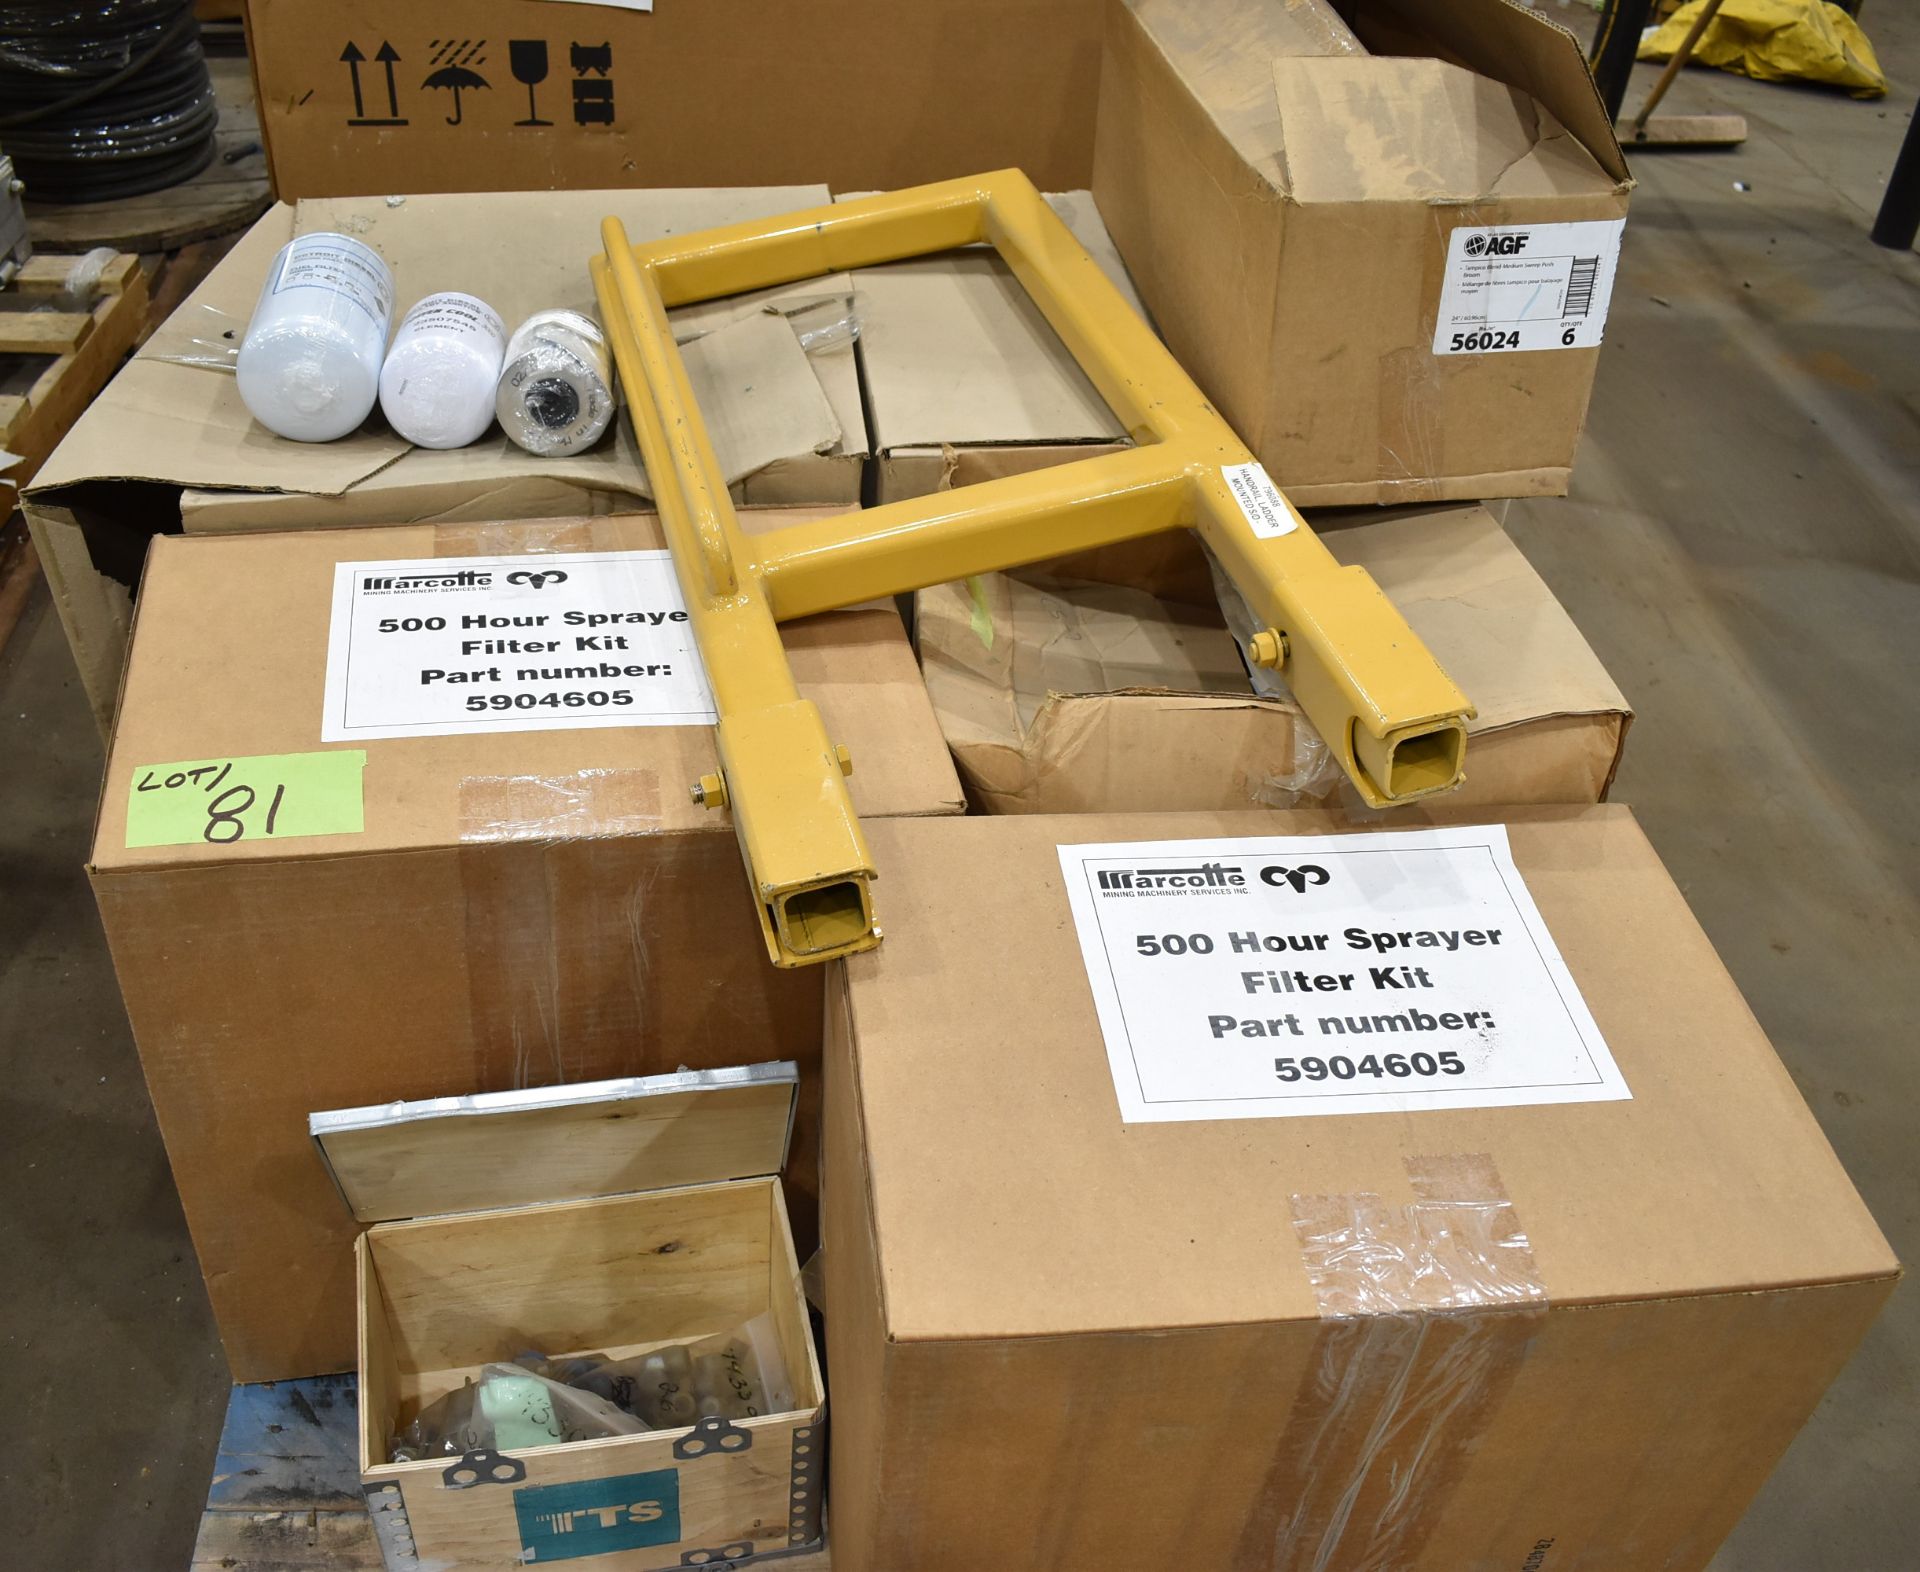 LOT/ CONTENTS OF SKID - (2) 500 HOUR SPRAYER FILTER KITS, (2) BOXES OF OIL FILTERS & AIR FITLERS,